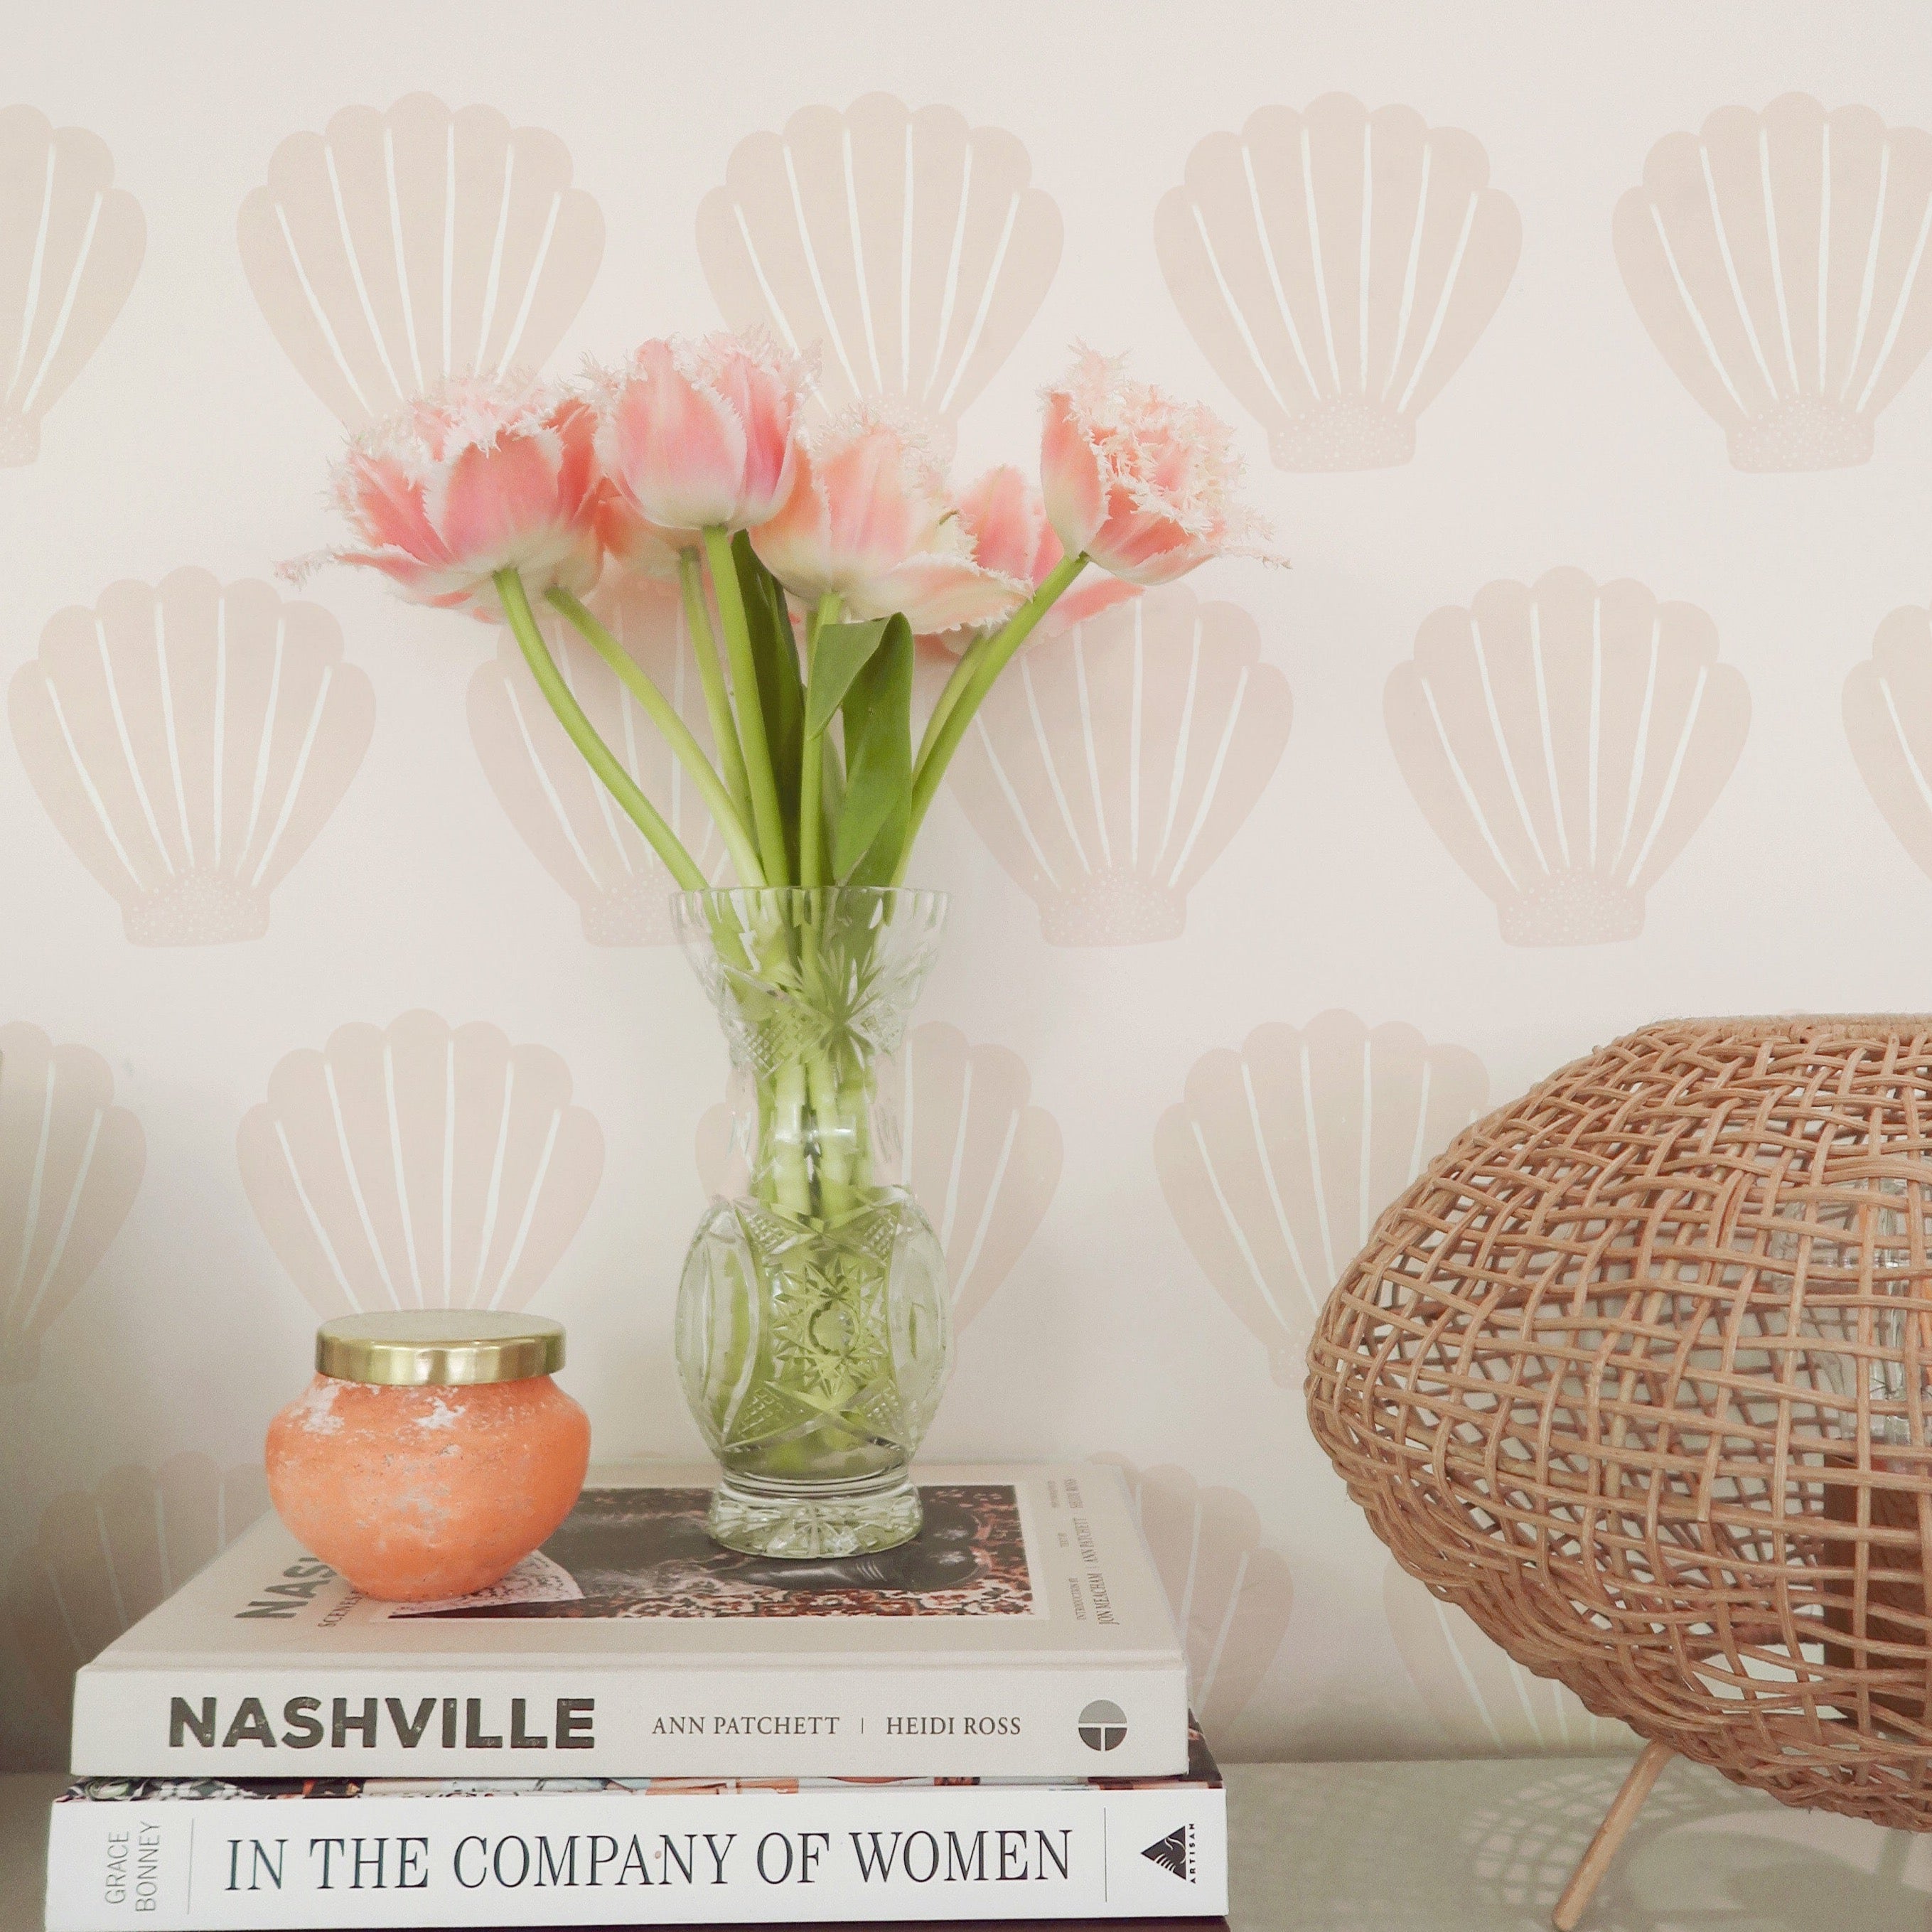 A cozy reading nook with Mermaid Sea Shell wallpaper providing a charming backdrop. The scene includes a wooden chair, a pile of books, and fresh flowers, creating a perfect spot for reading and relaxation.